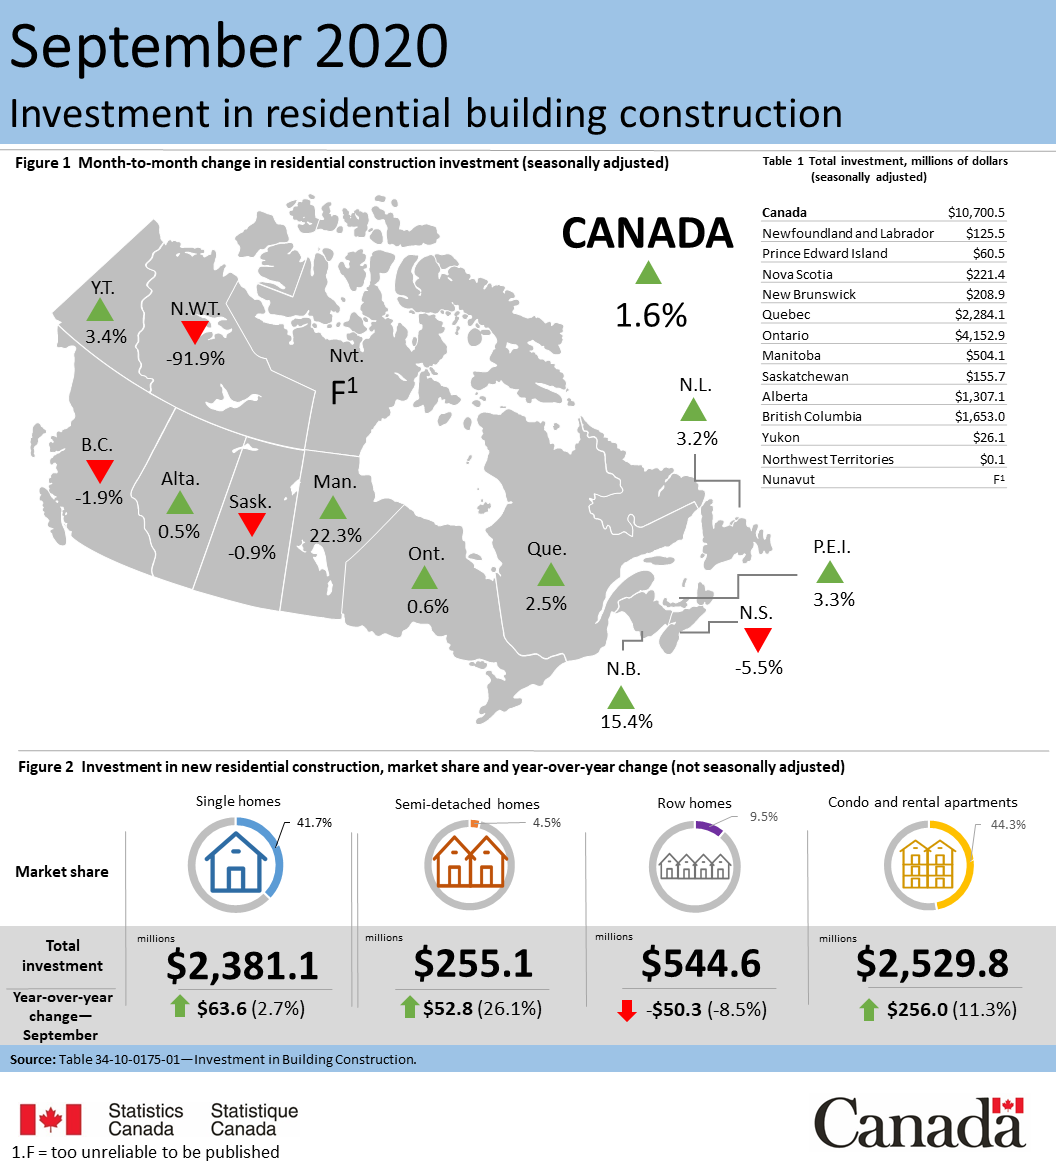 Thumbnail for Infographic 2: Investment in residential building construction, September 2020